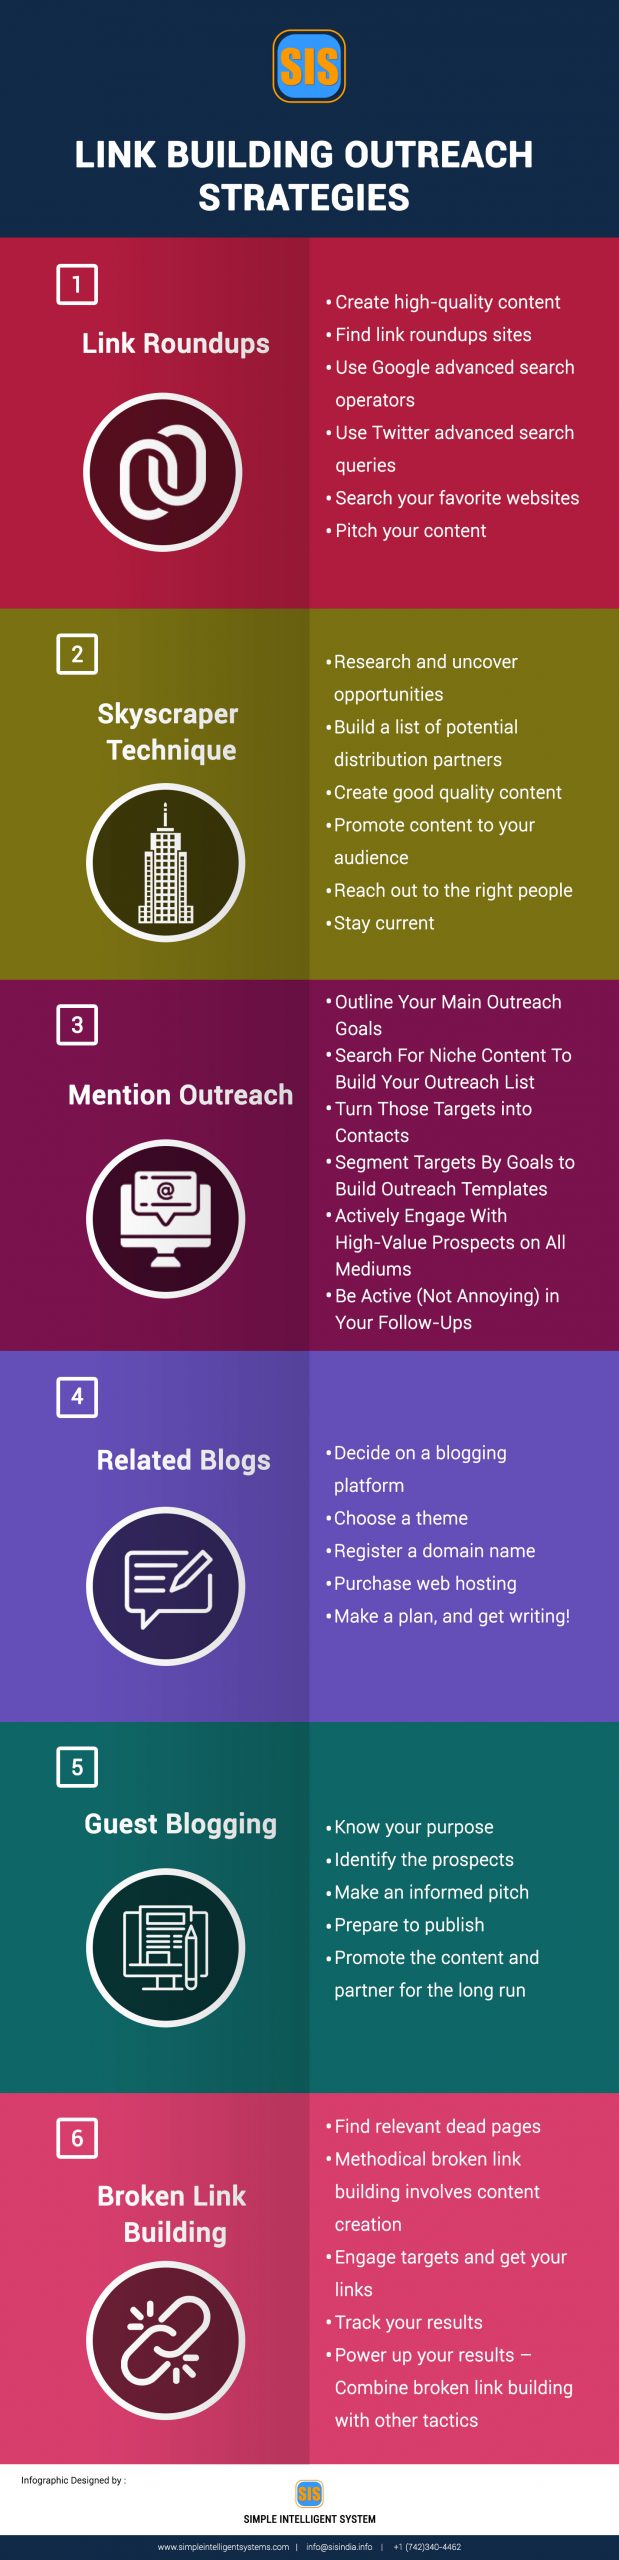 Link Building Outreach Strategies